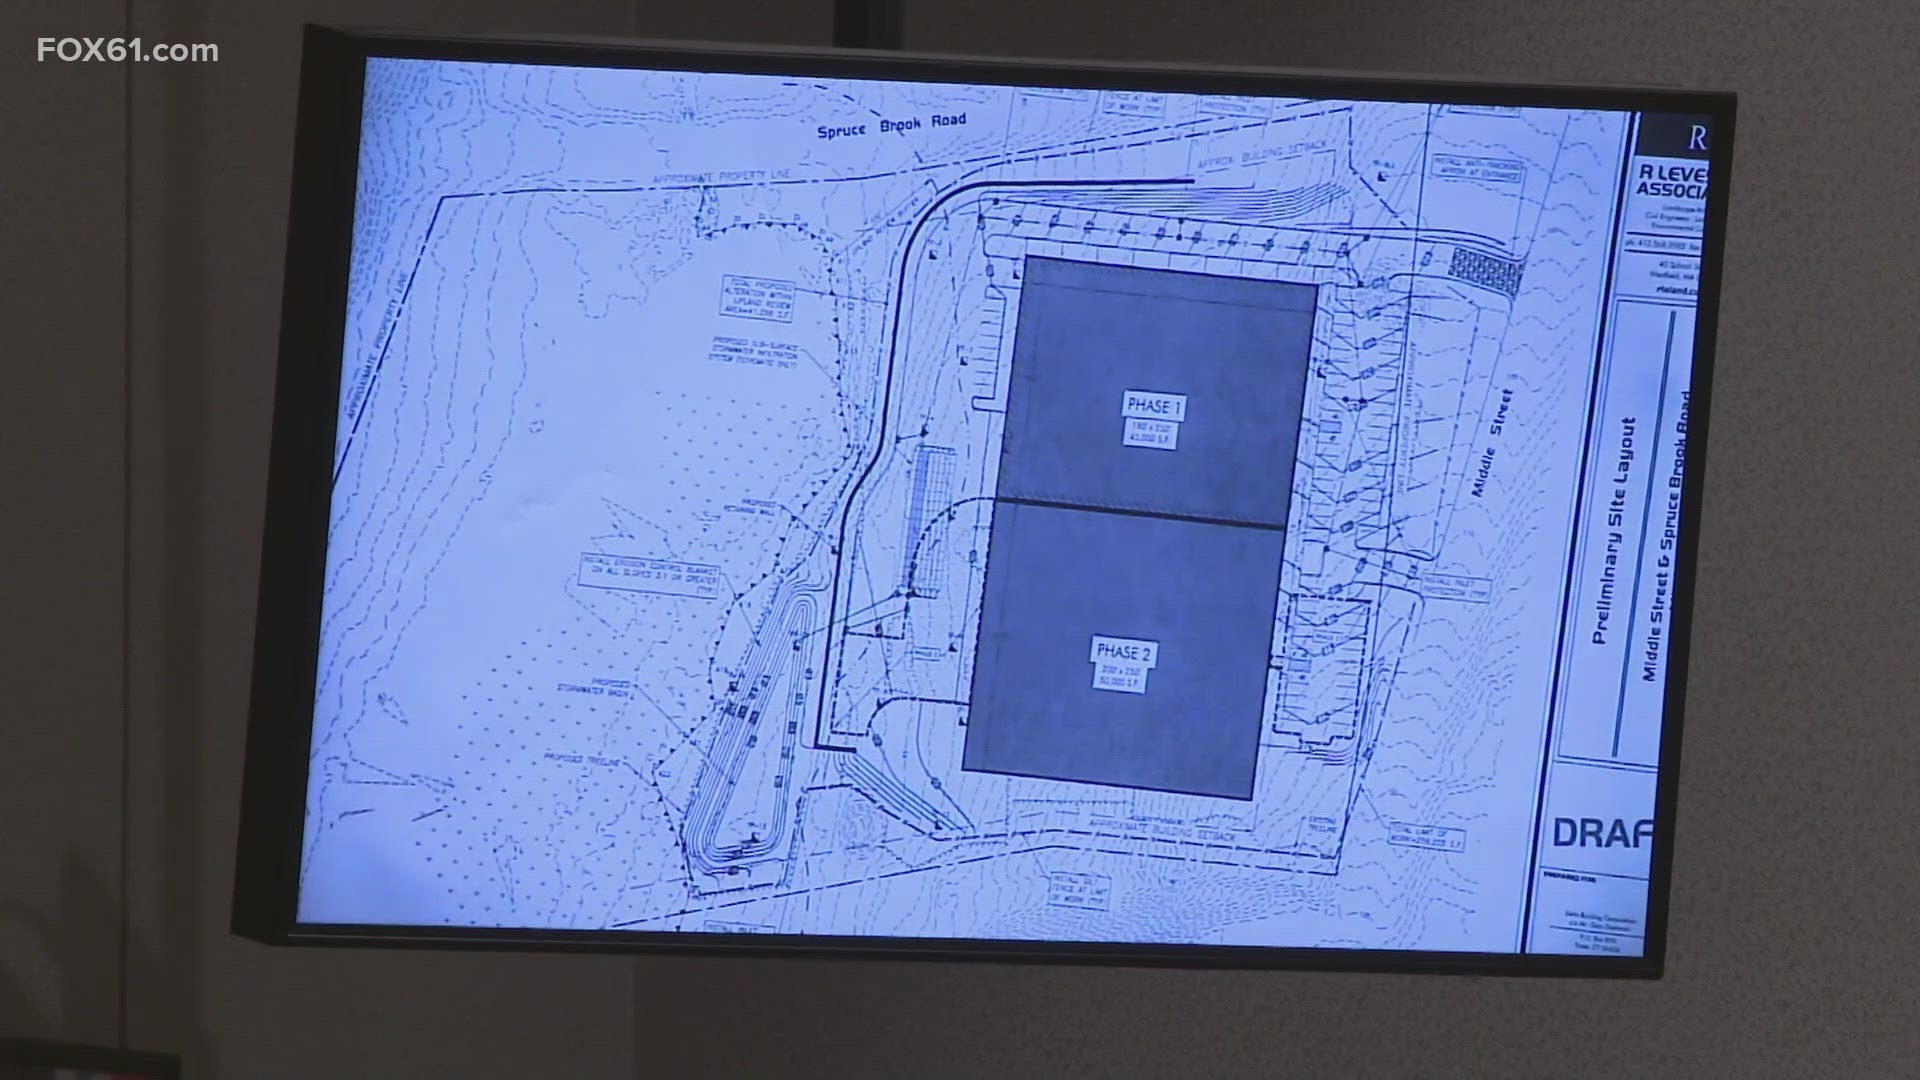 The proposed construction of an industrial building on a wetlands area in Middletown was a topic of concern at a city meeting Wednesday evening.